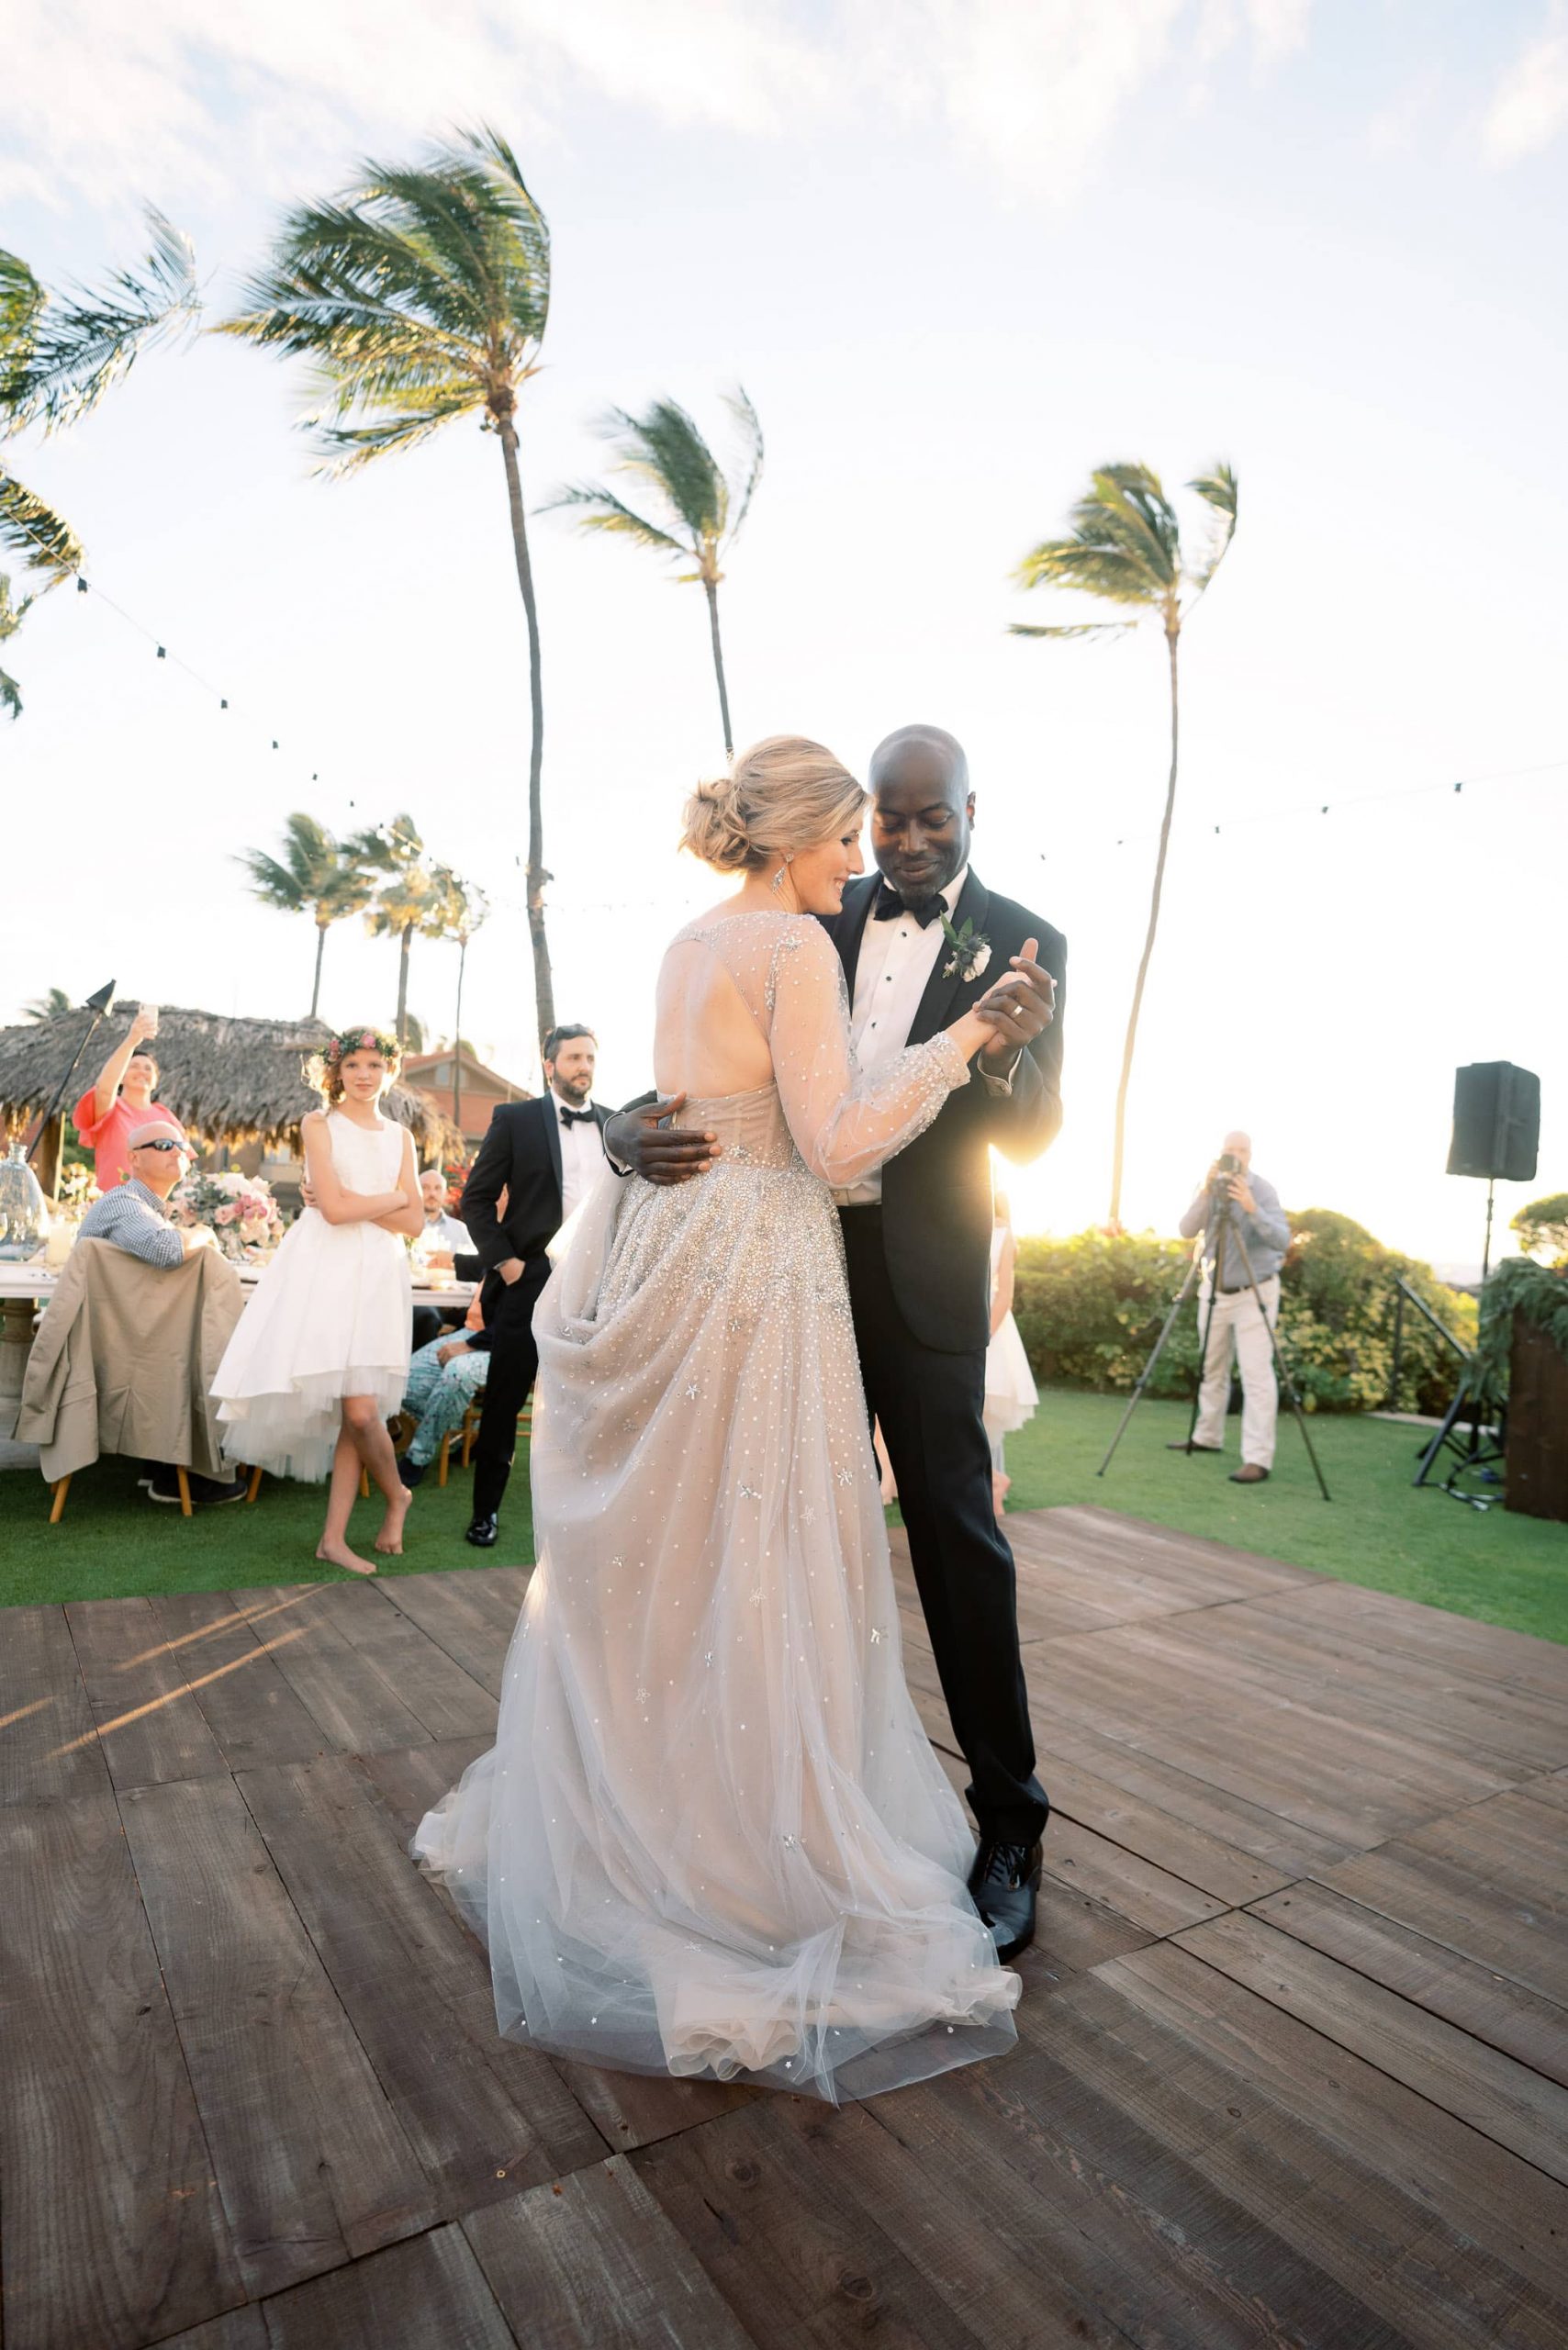 Bride and groom first dance during reception at Maui wedding at Four Seasons Resort Maui in Wailea, Hawaii | Photo by James x Schulze